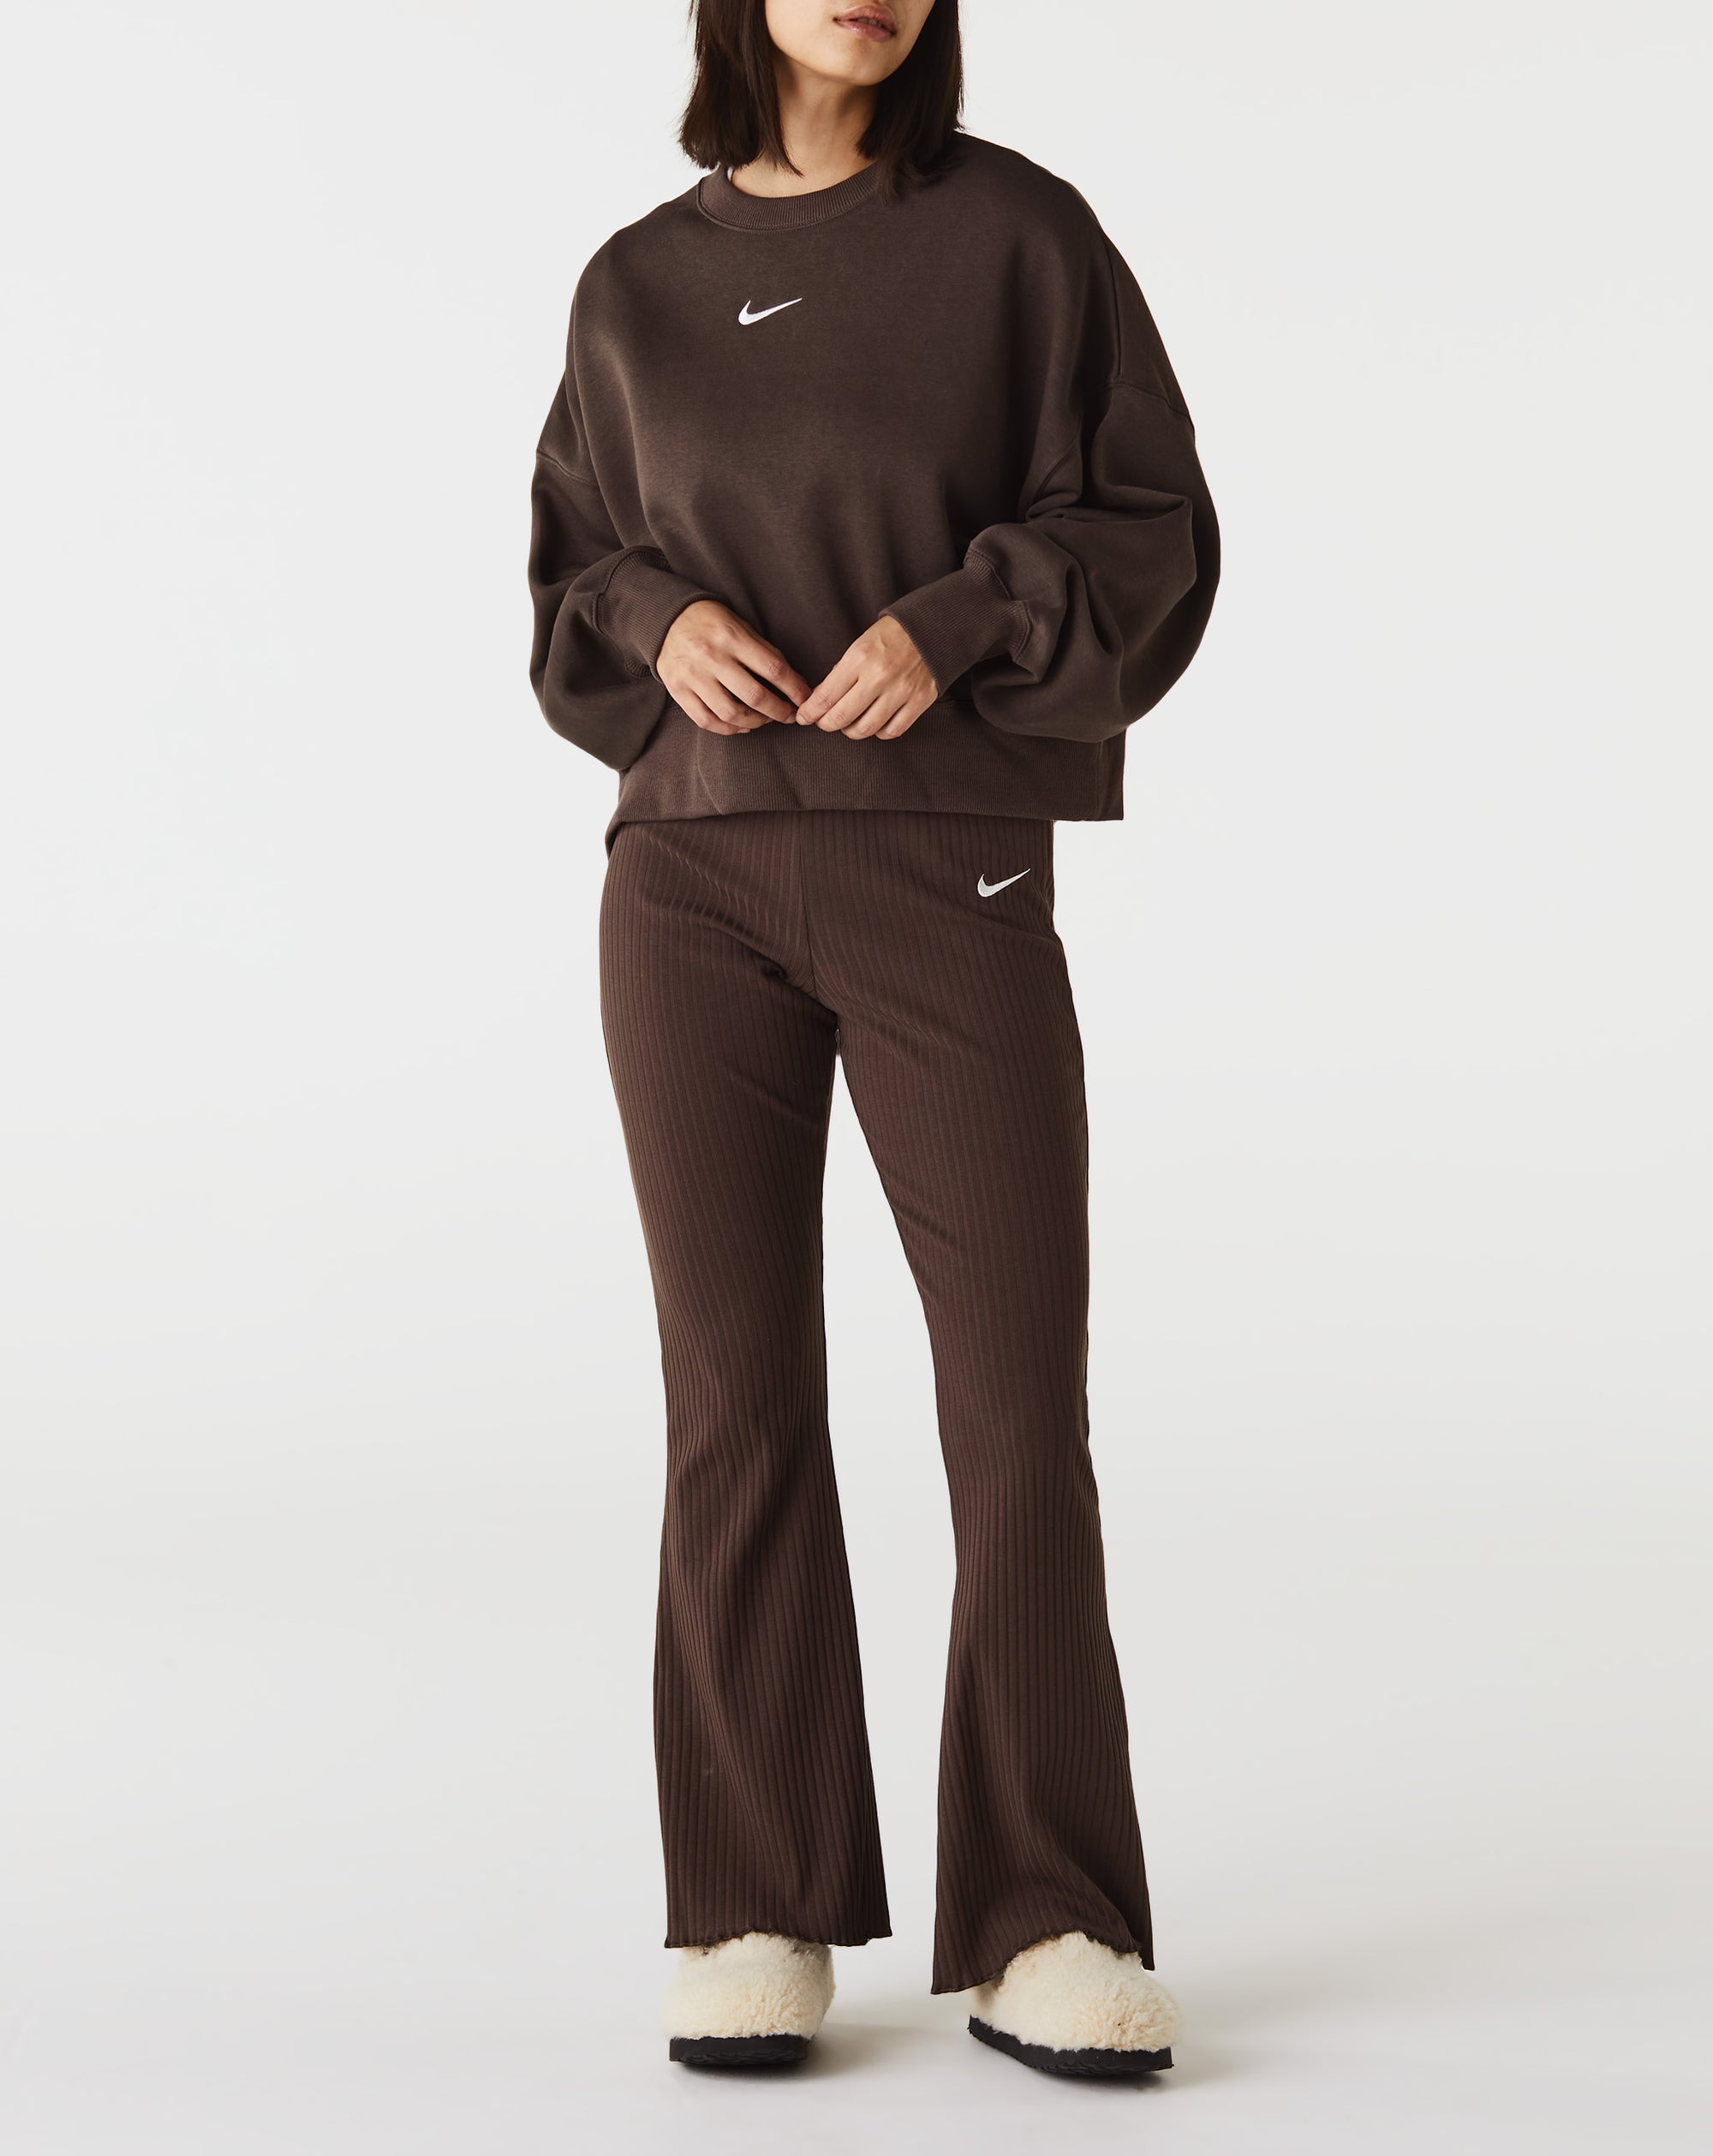 Nike Women's High-Waisted Ribbed Jersey Pants - Rule of Next Apparel